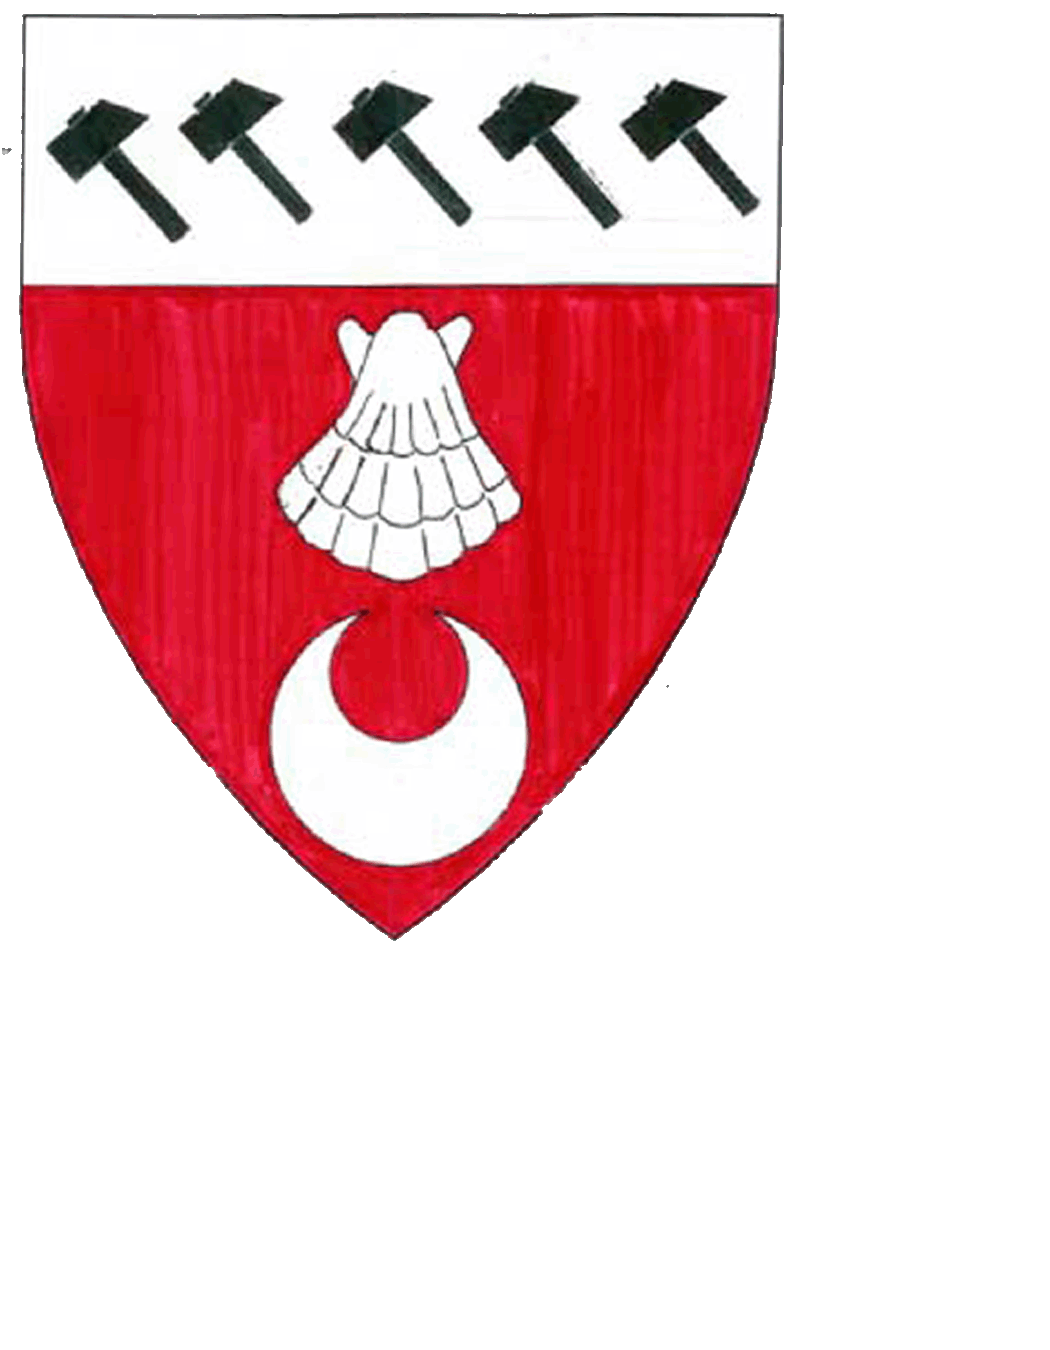 The arms of Meave Douglass